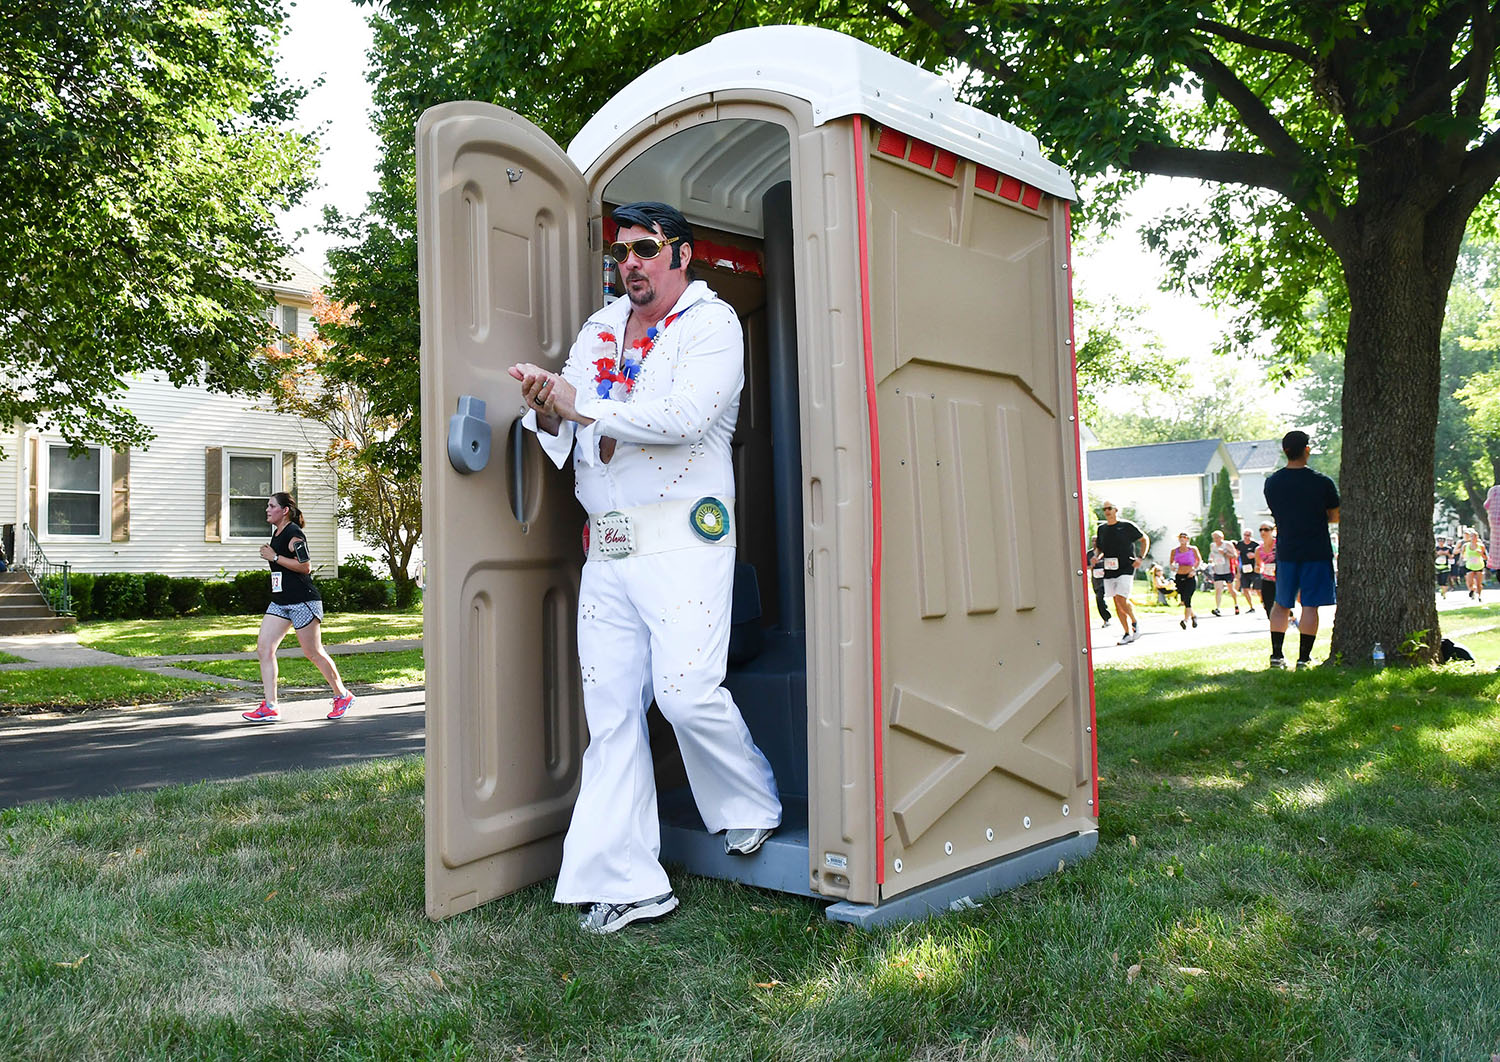 Running Elvis Scott Cullen, of Taylor Ridge, survives the port-a-potty along Kirkwood Blvd. during the Quad-City Times Bix 7 Saturday, July 28, 2018 in Davenport, Iowa. Upon exiting the port-a-potty Cullen quipped "Wow. I smells like something died in there."  (Todd Mizener - Dispatch/Argus)